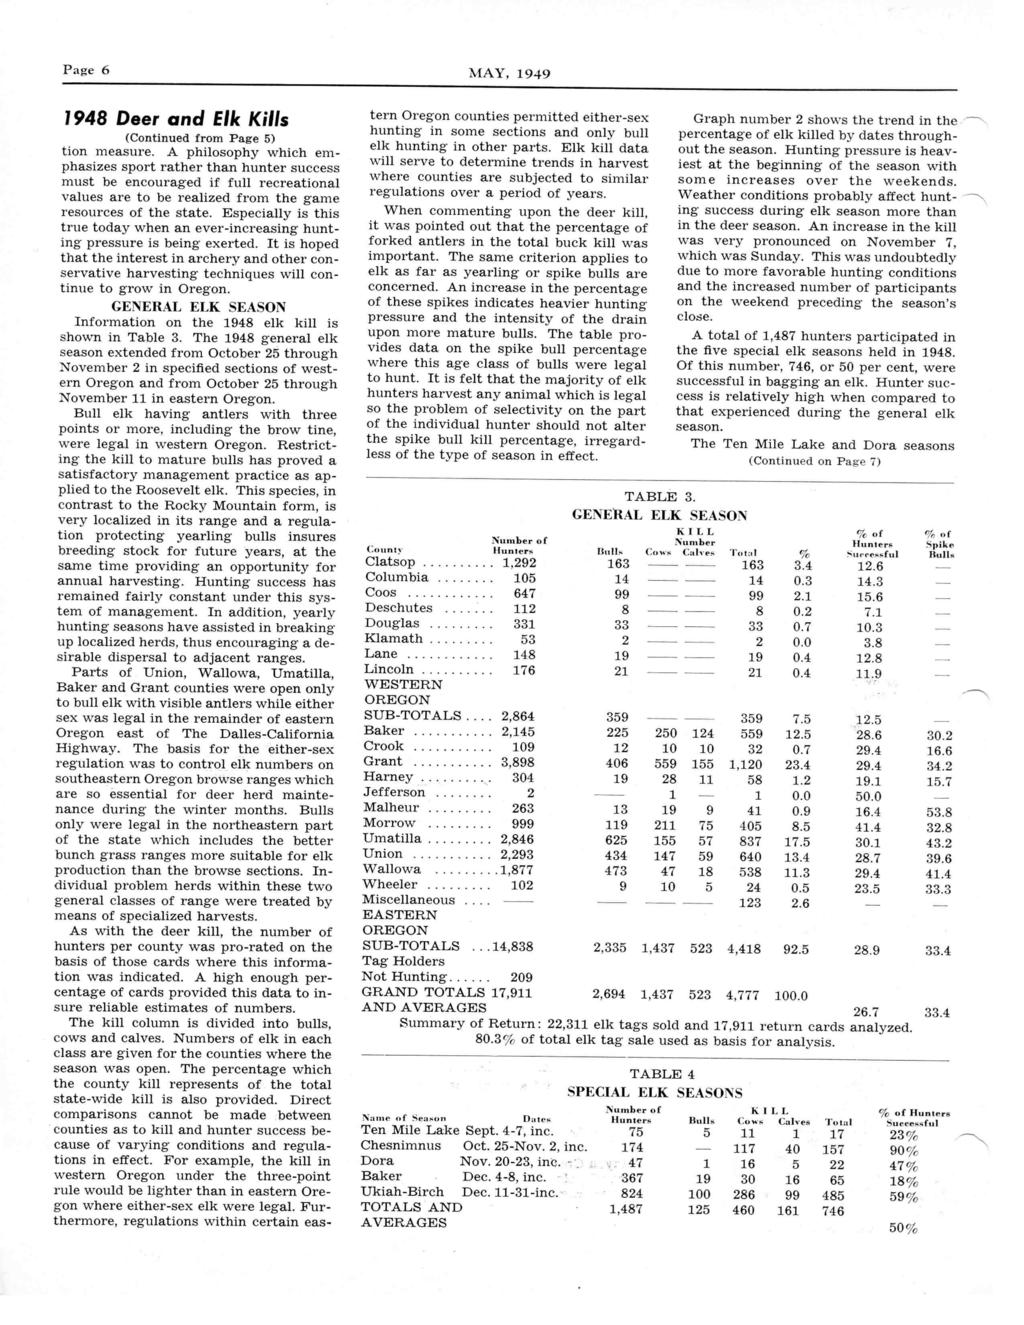 Page 6 MAY, 1949 1948 Deer and Elk Kills (Continued from Page 5) tion measure.